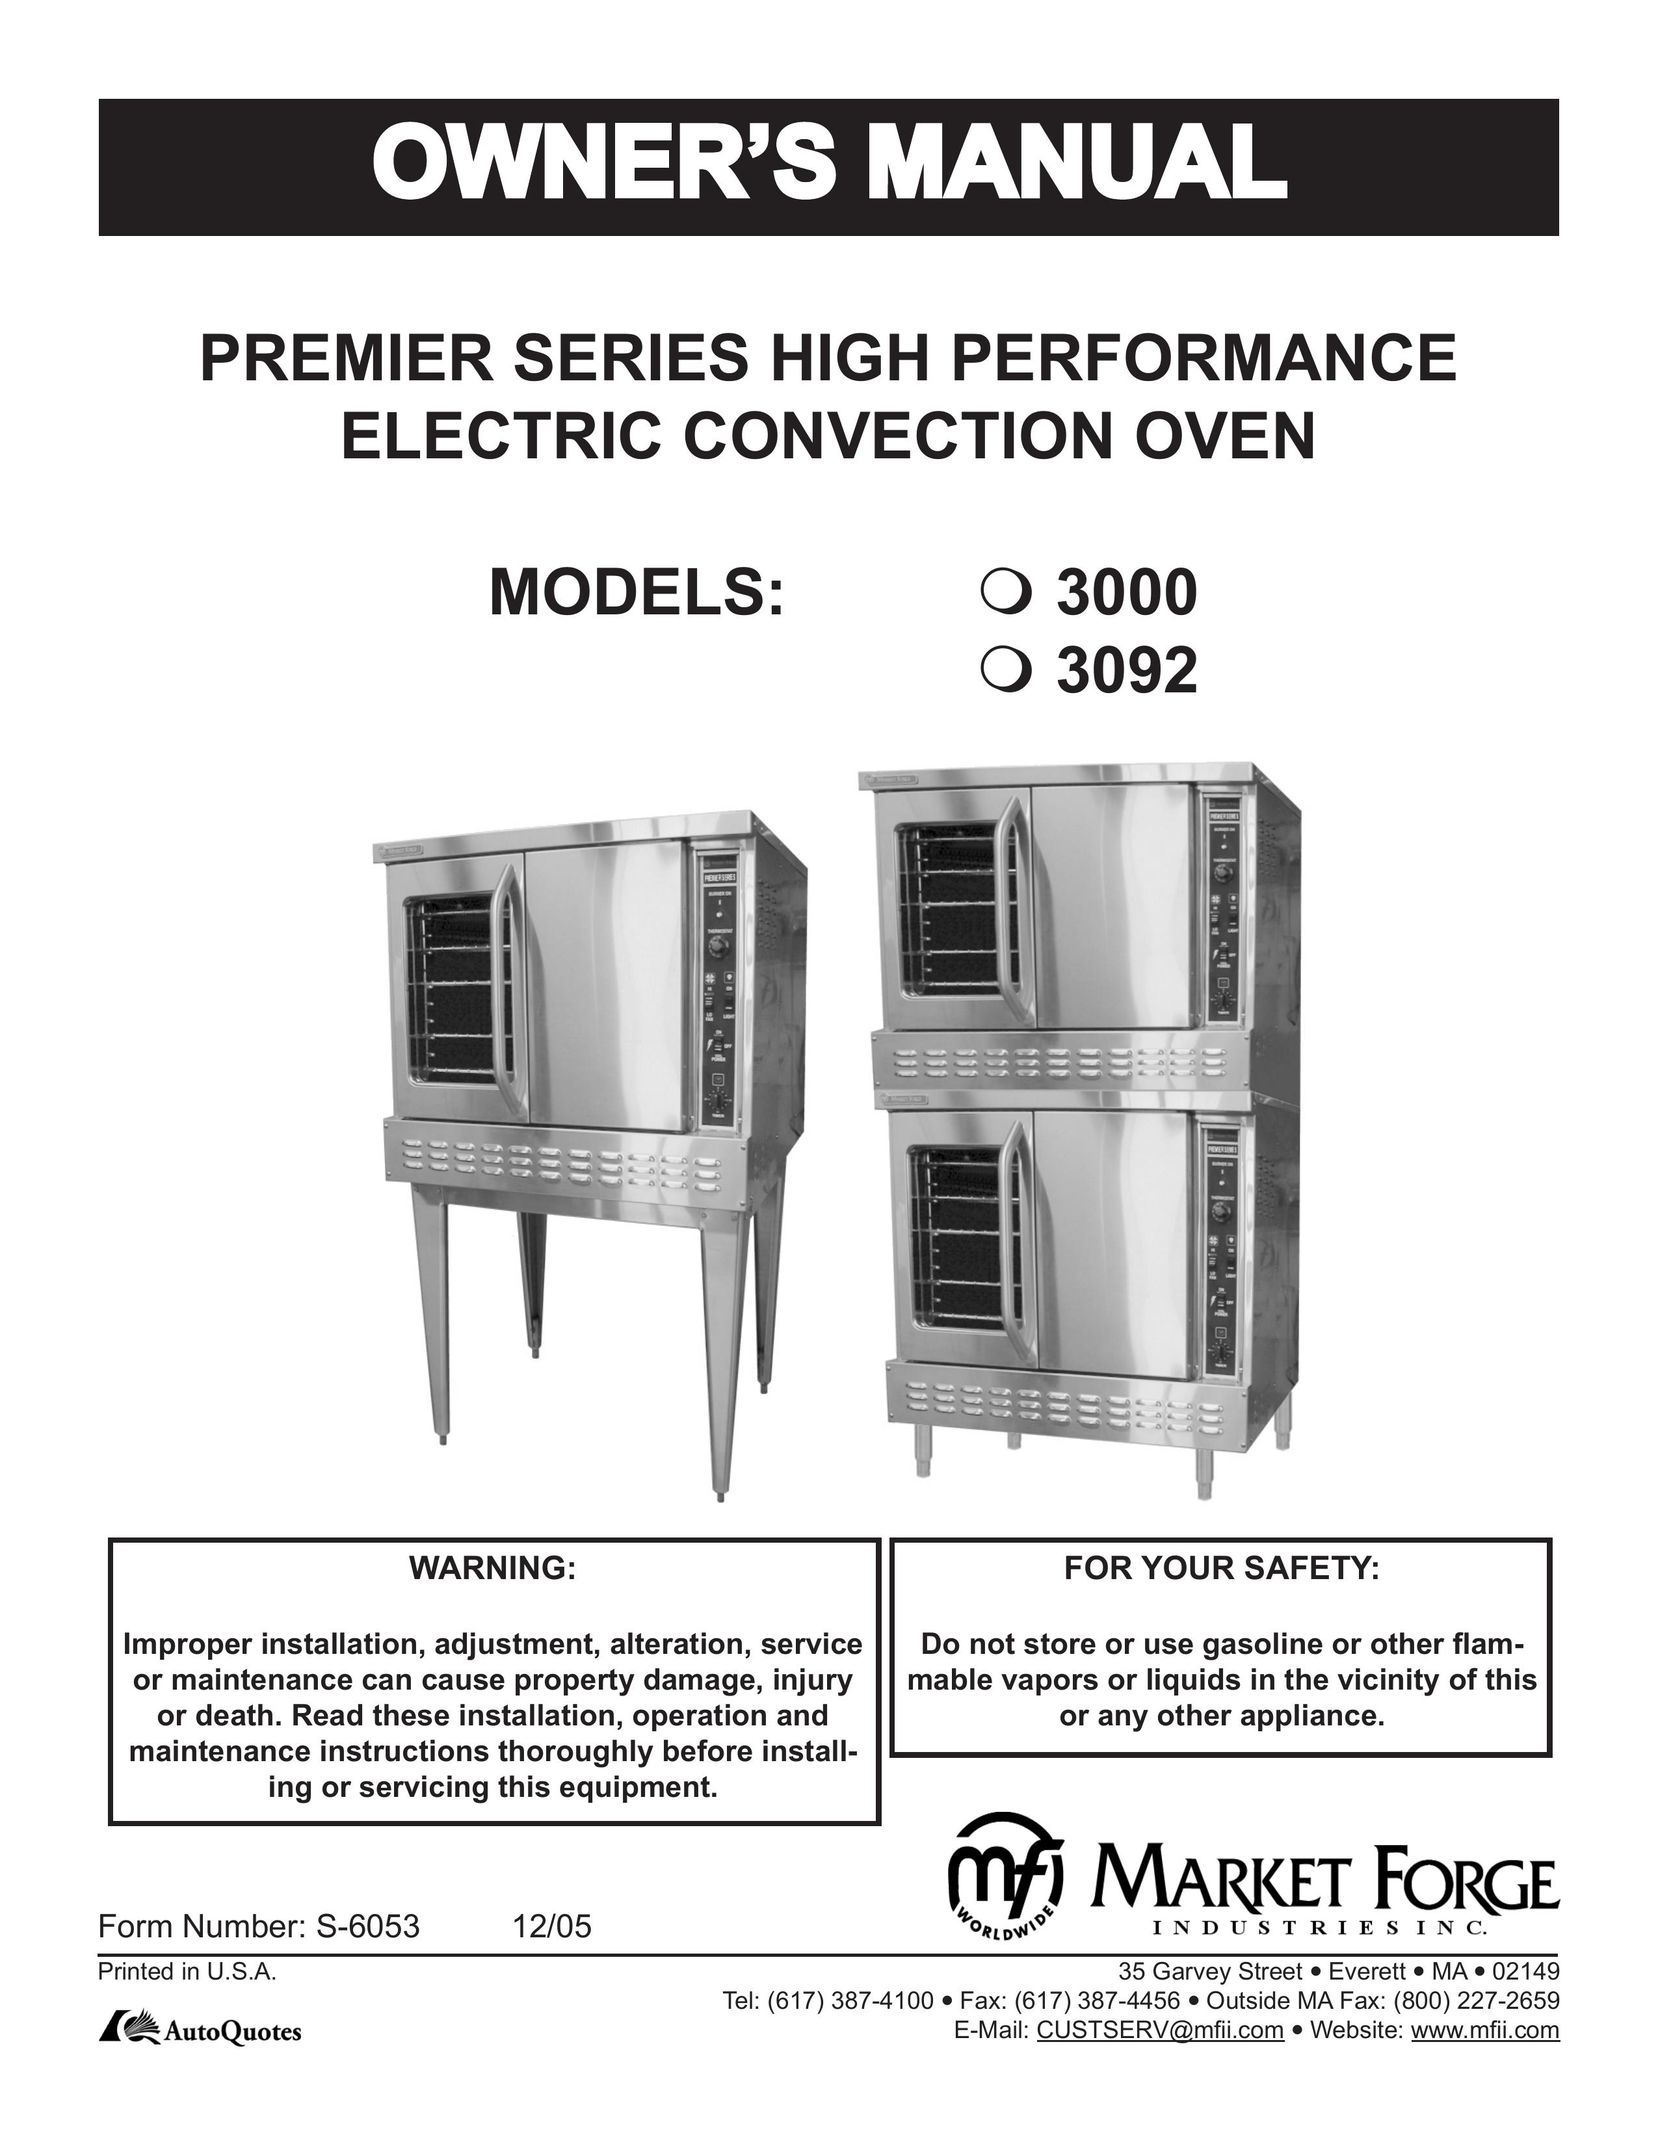 Market Forge Industries M 3000 Convection Oven User Manual